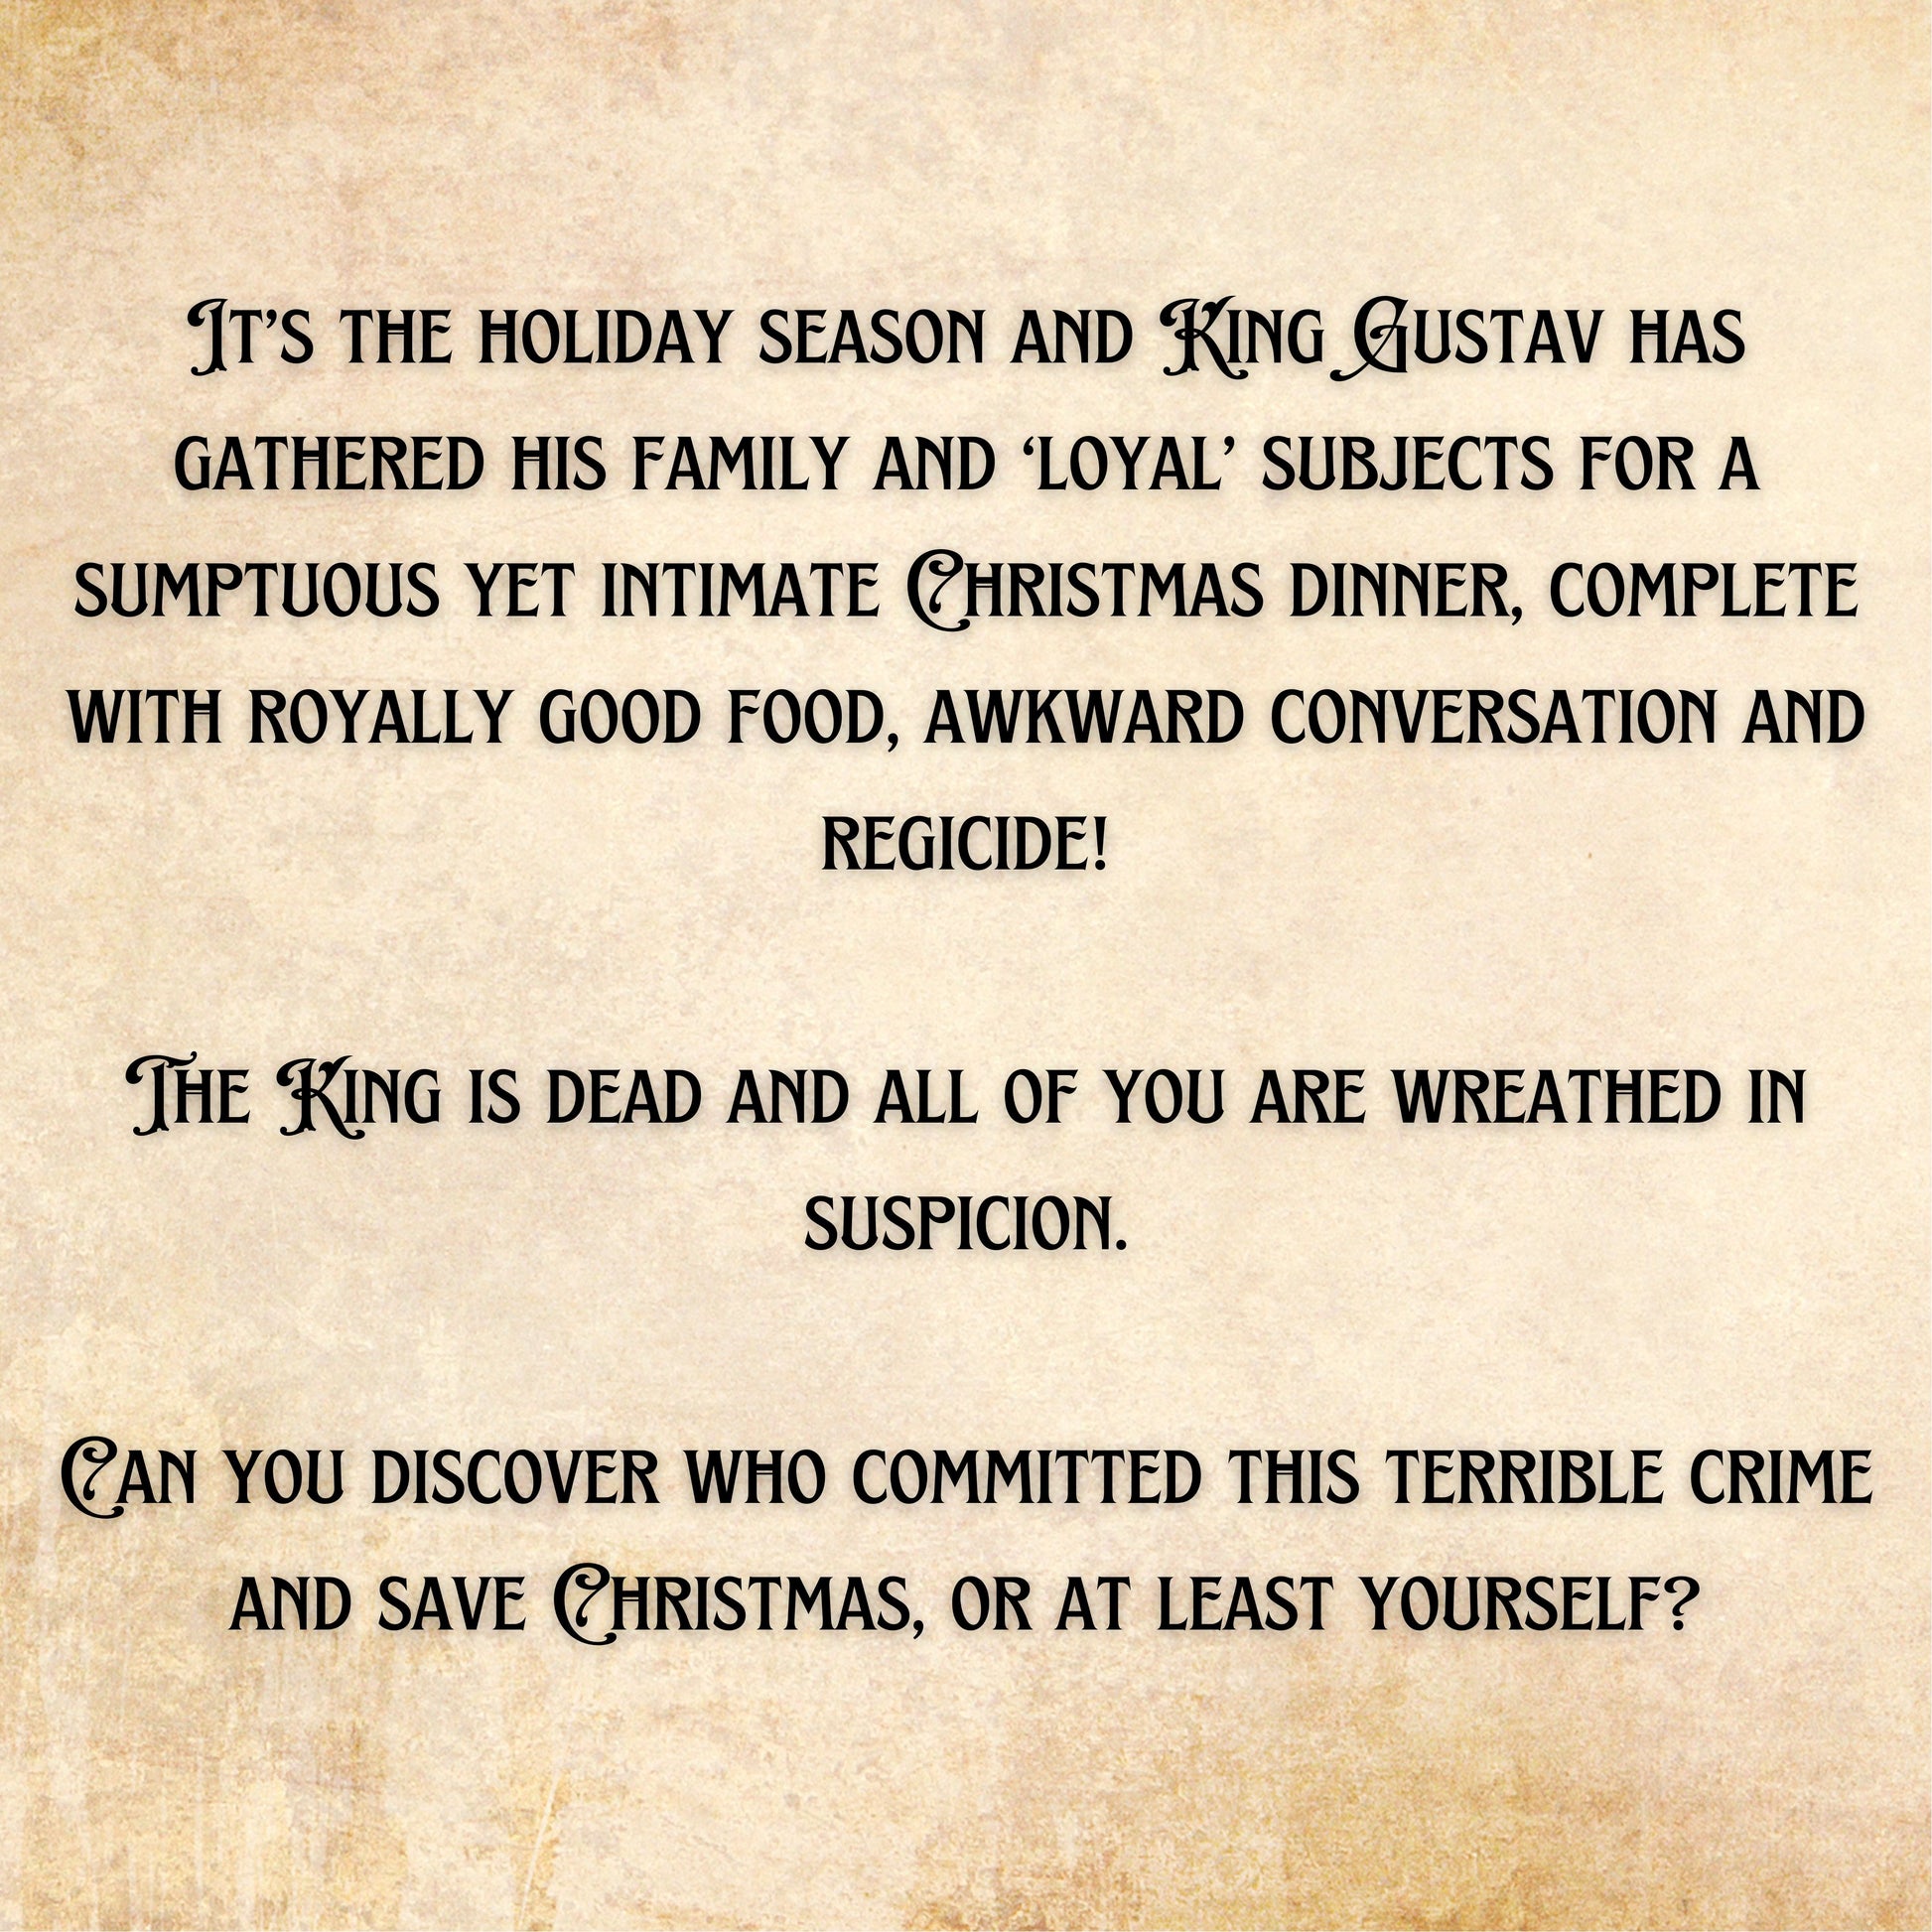 brief description of the murder mystery game